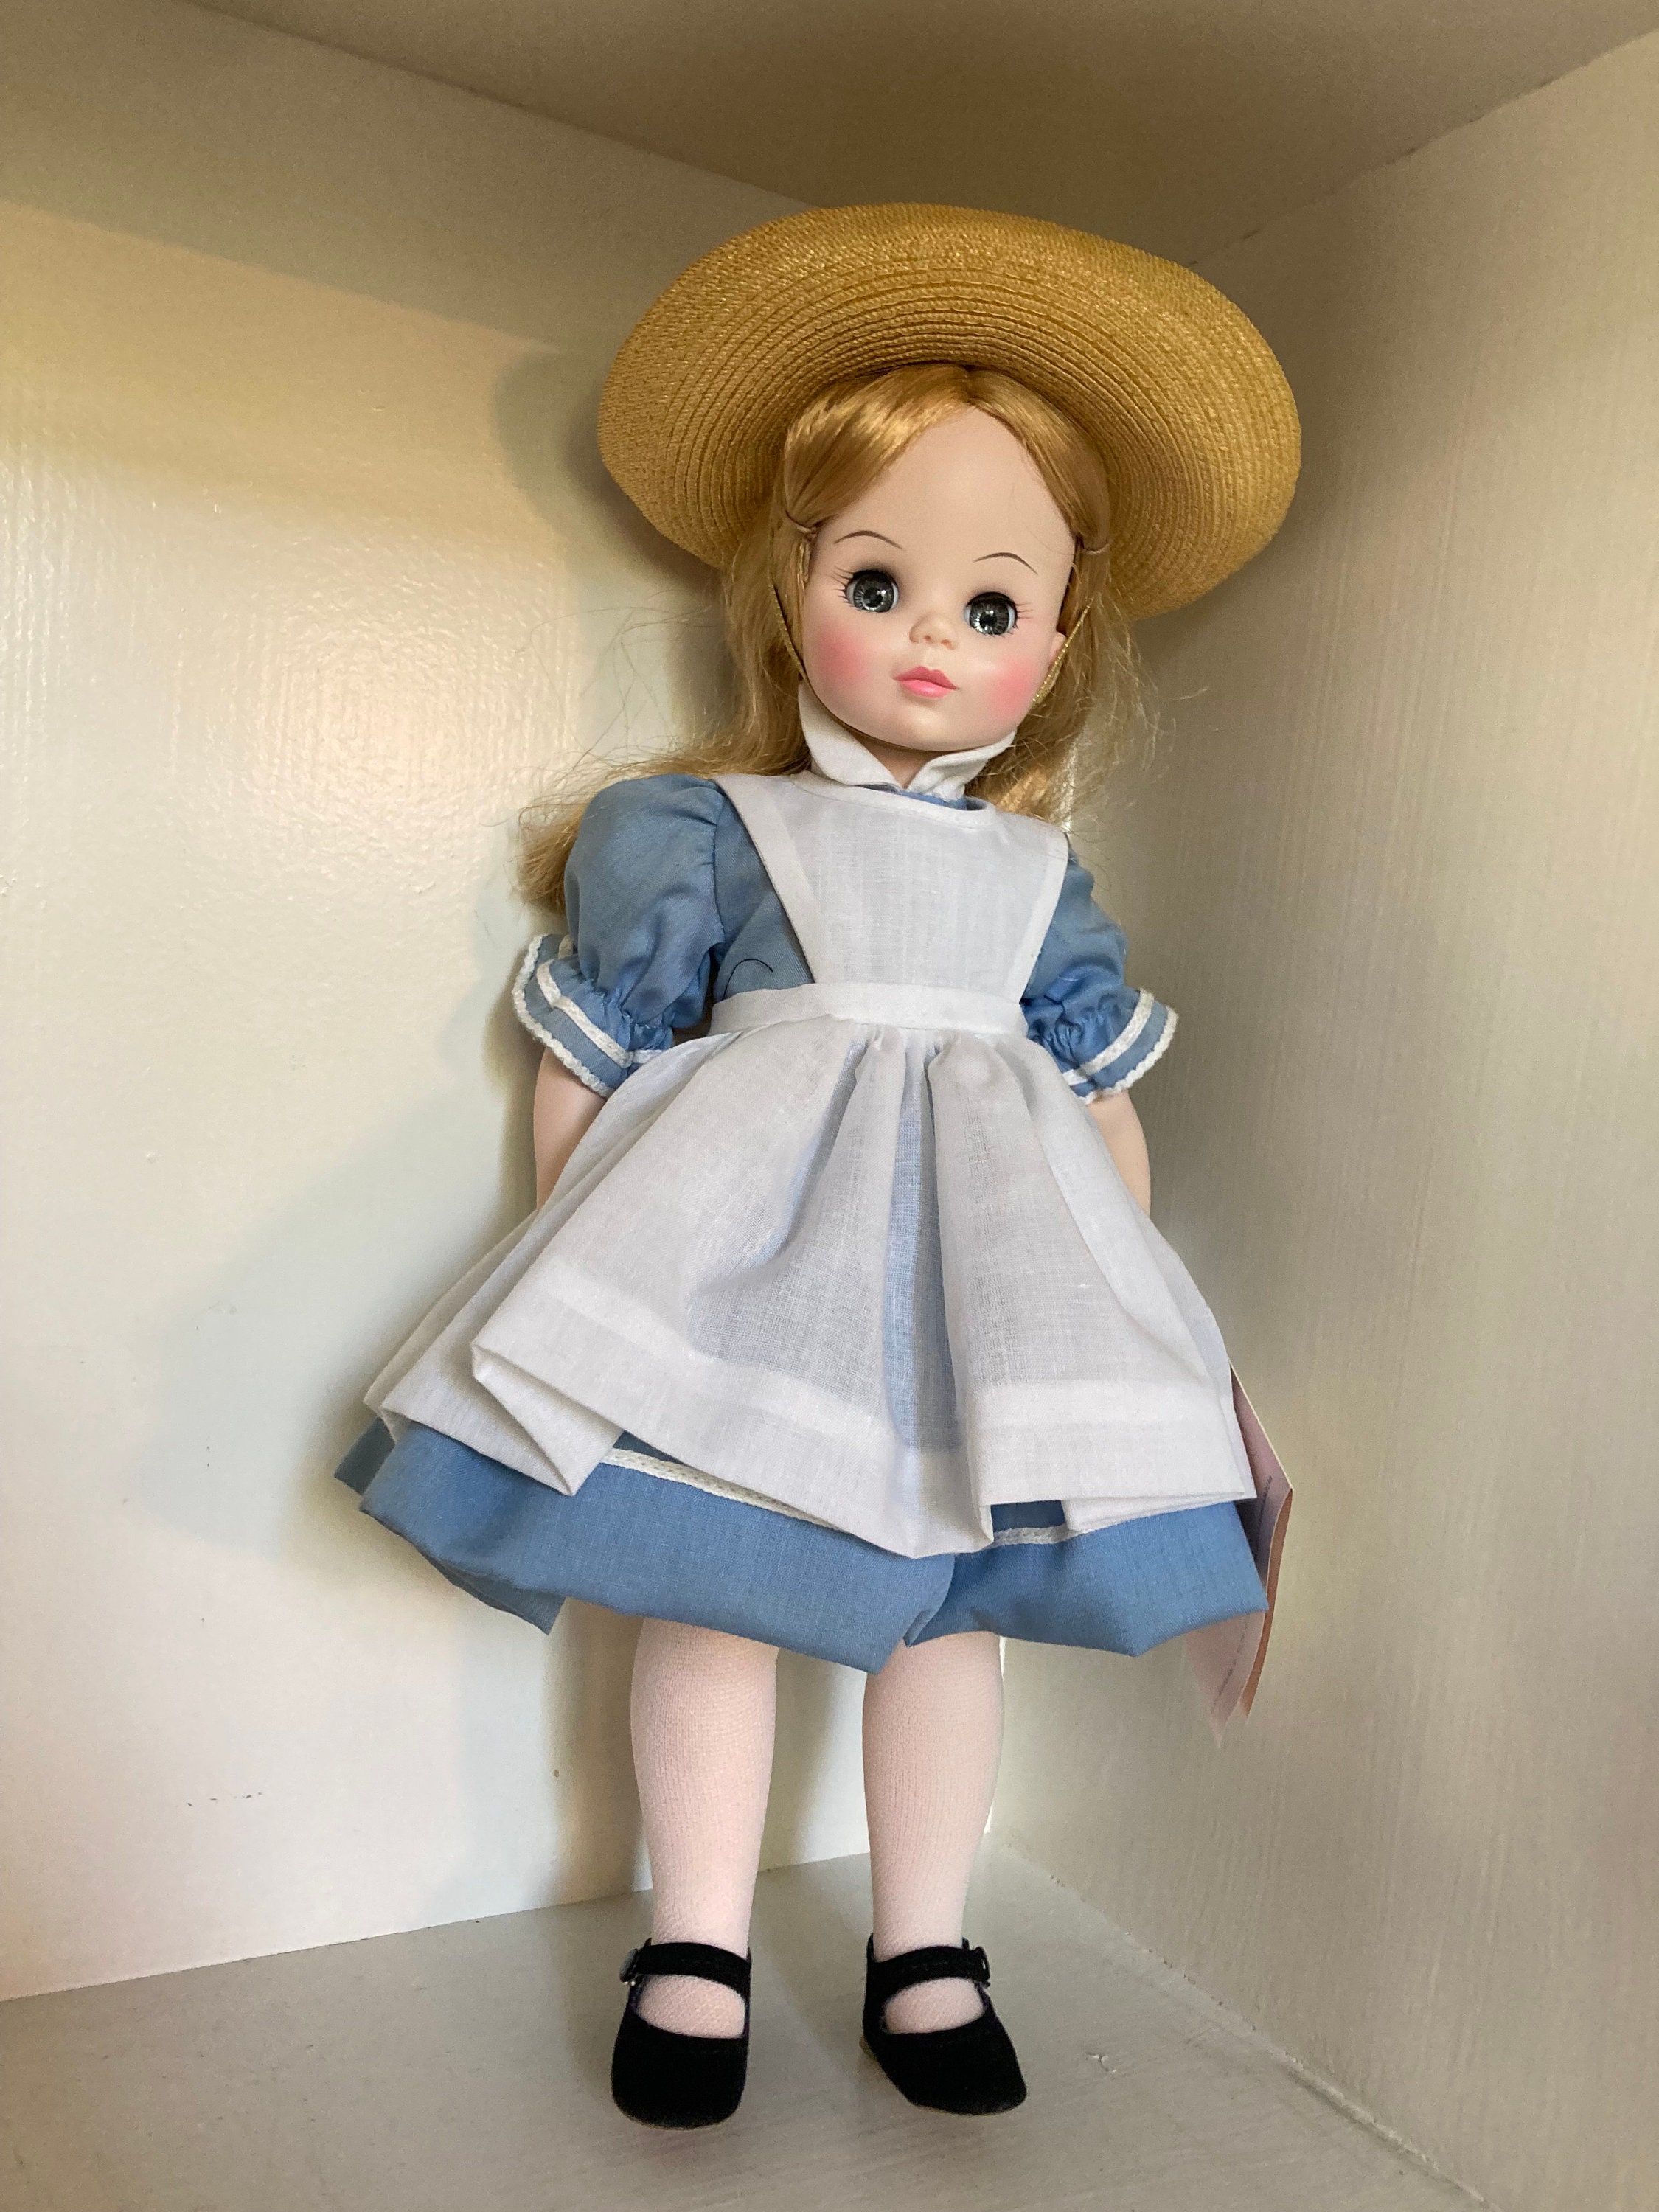 Alice in Wonderland doll 18 1950's collectible